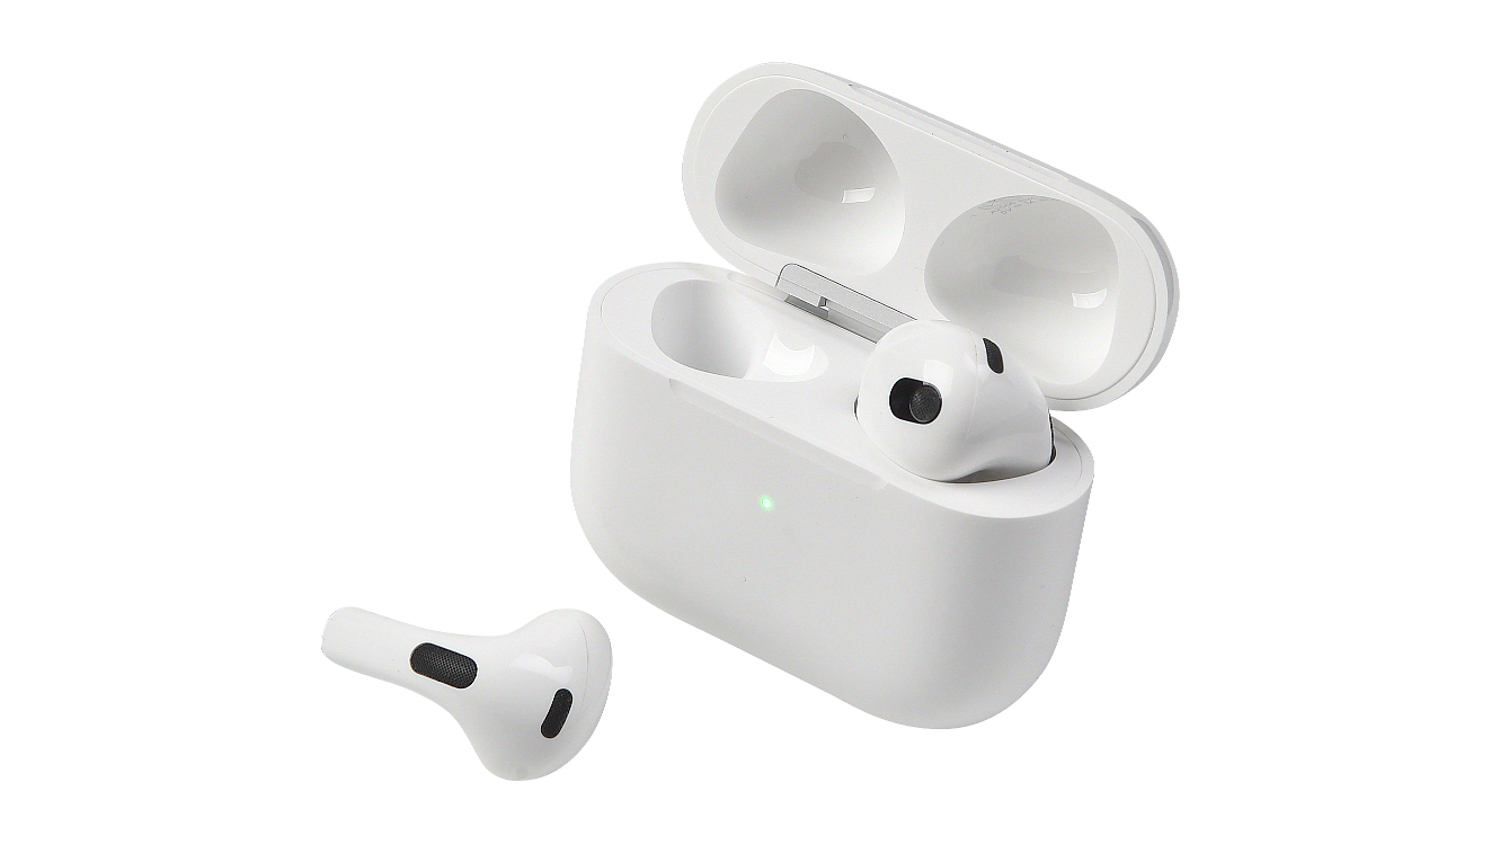 Apple AirPods (3rd generation) carousel image